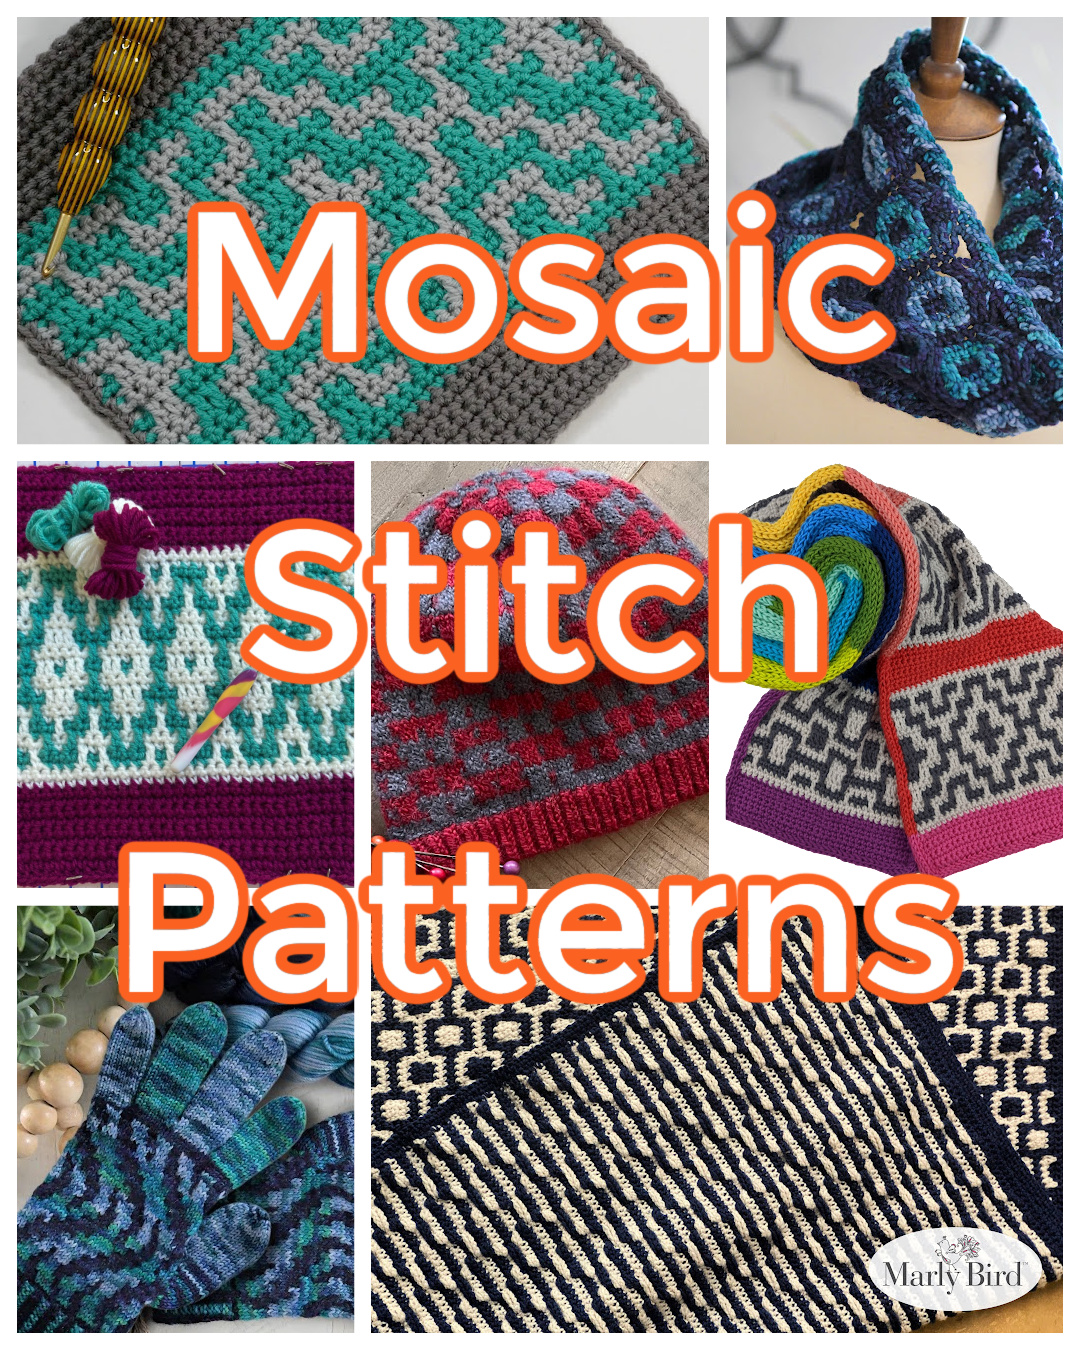 Mosaic Stitch Patterns for both Knit and Crochet - Marly Bird